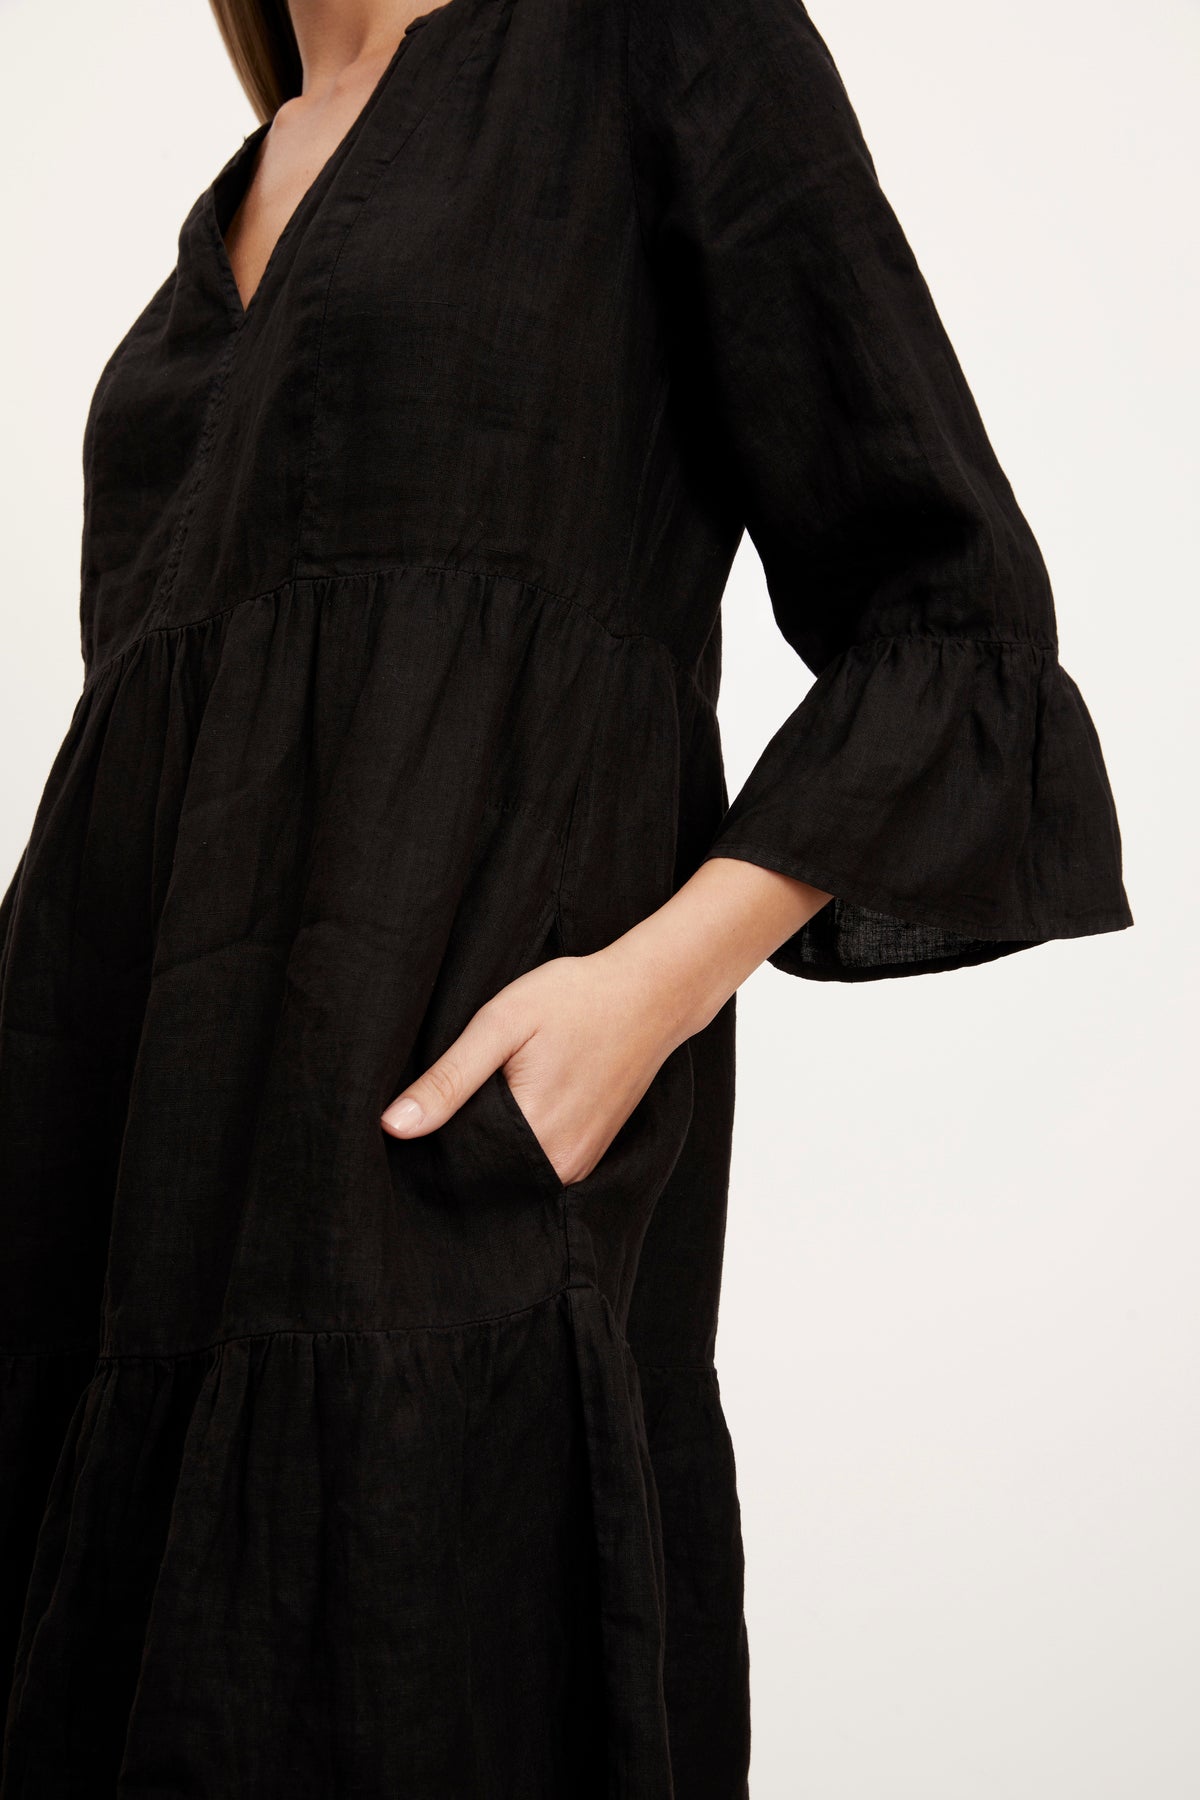 Aurora Tiered Dress in black linen close up of models hand in pocket-26426151502017